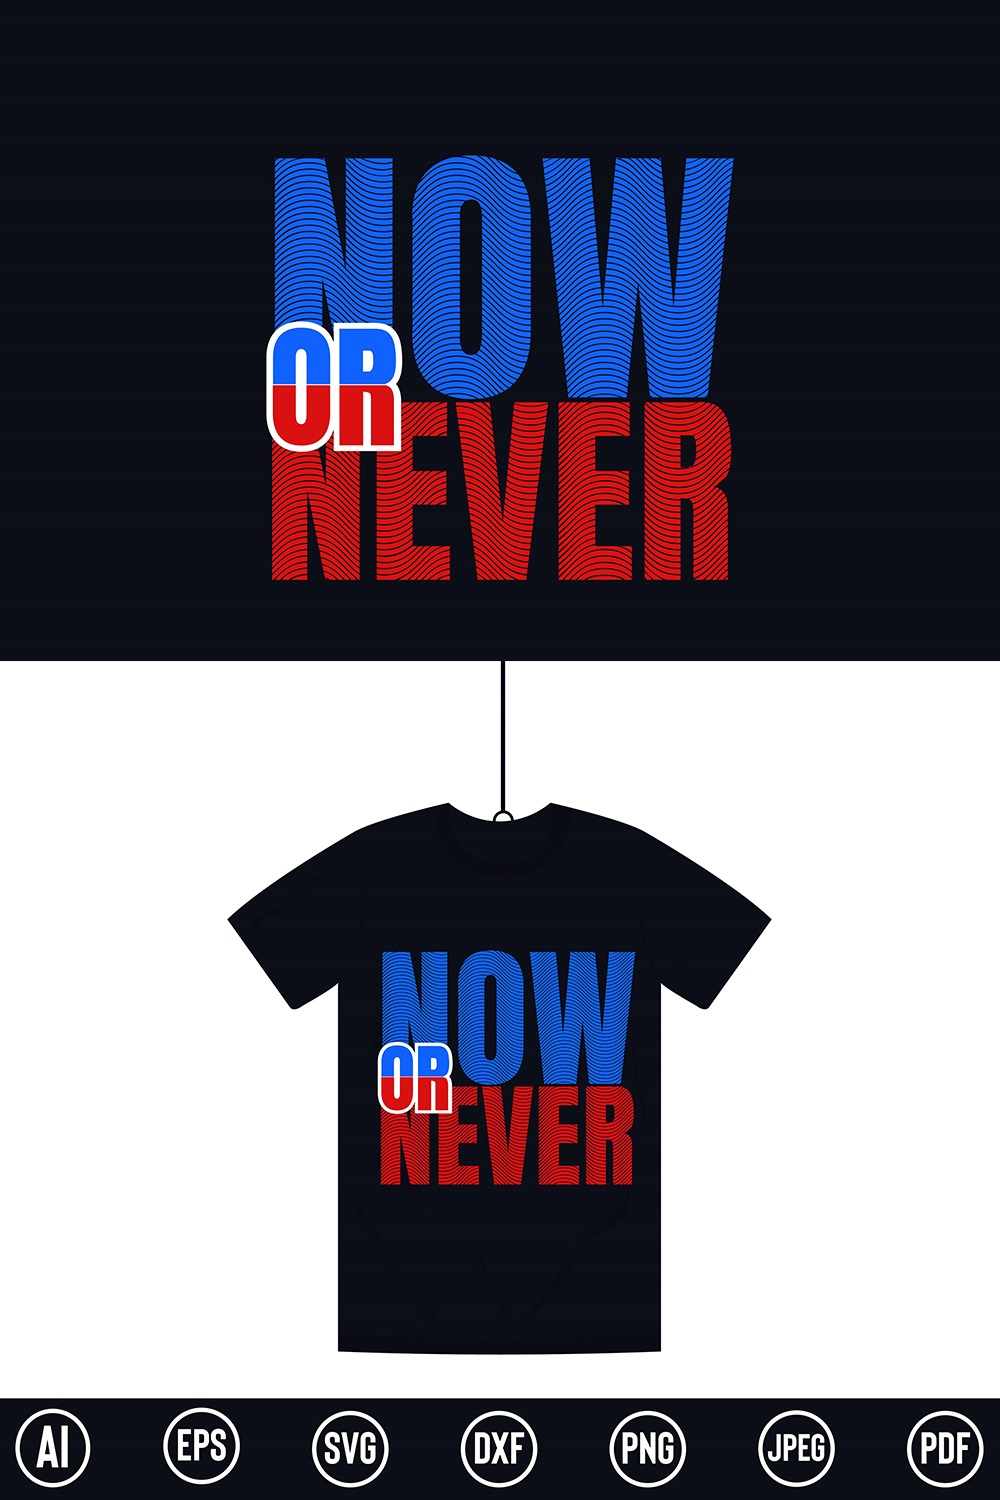 Modern and Inspirational T-Shirt design with “Now or Never” quote for t-shirt, posters, stickers, mug prints, banners, gift cards, labels etc pinterest preview image.